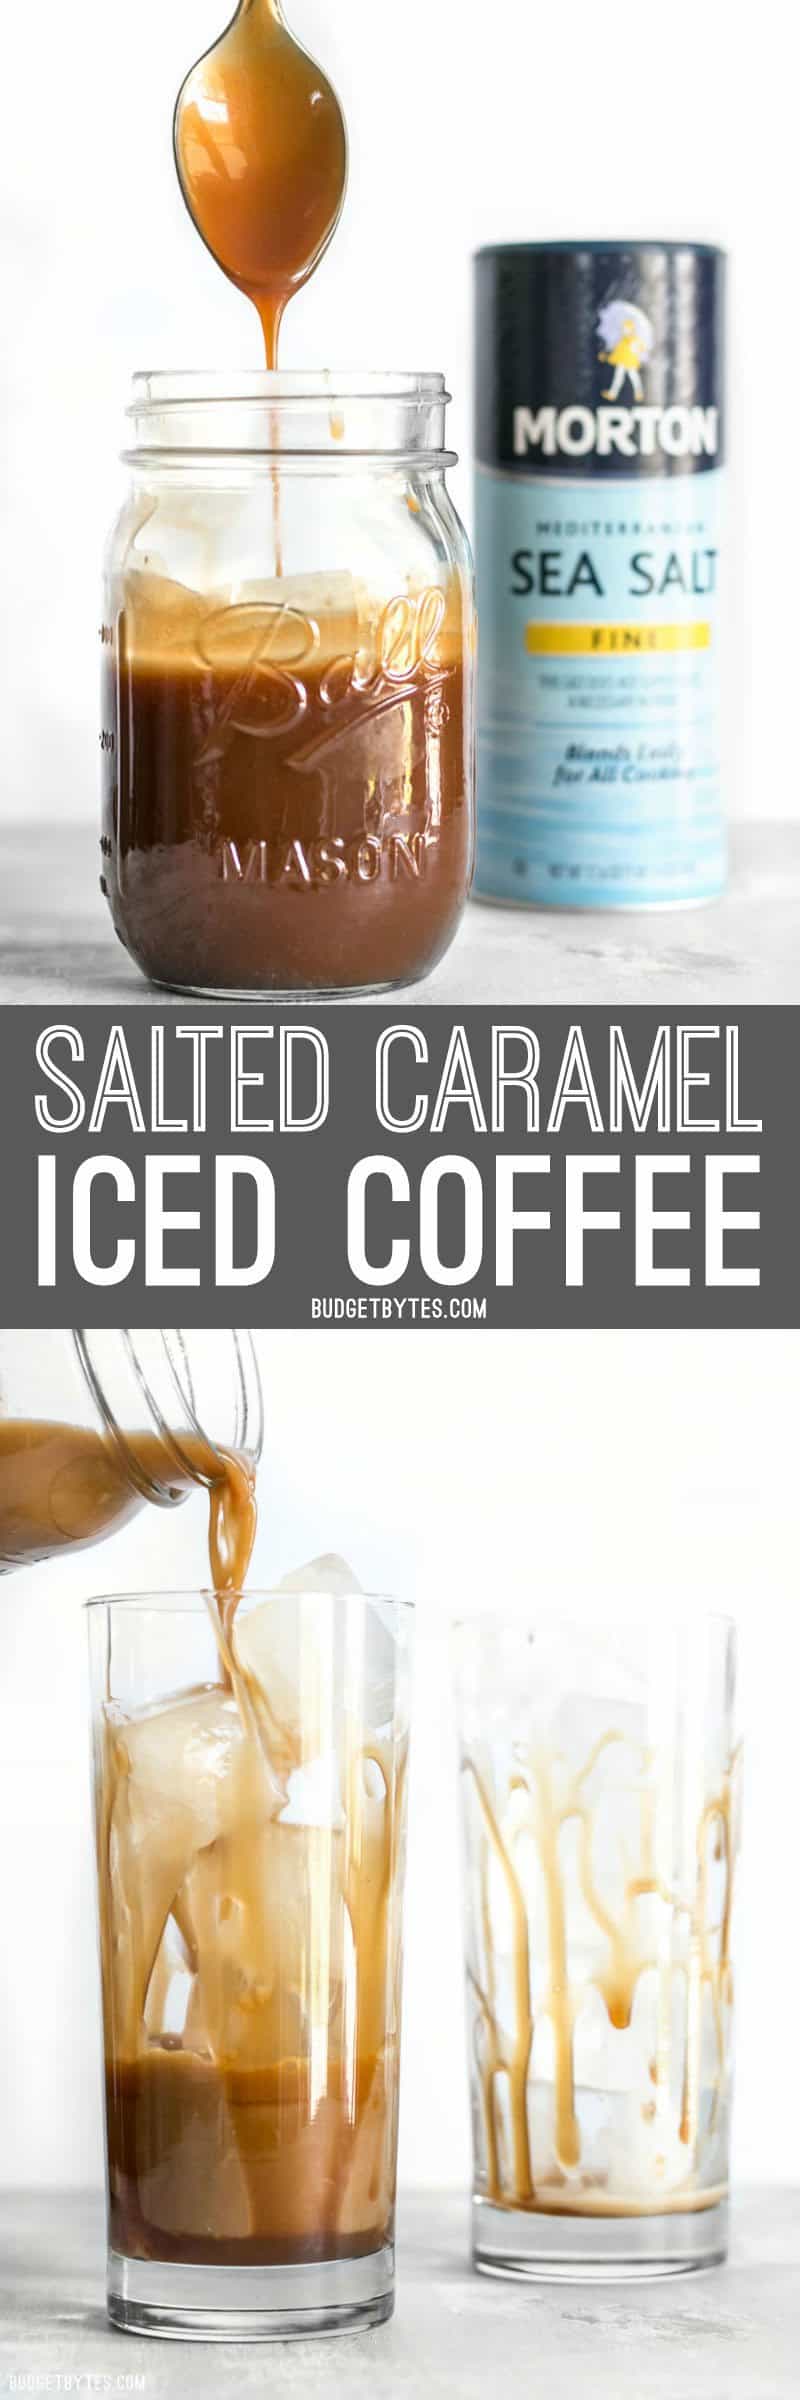 A little fine sea salt helps this Homemade Salted Caramel Iced Coffee stay smooth and taste extra sweet. #ad Make this coffee house favorite at home for less! #ad BudgetBytes.com